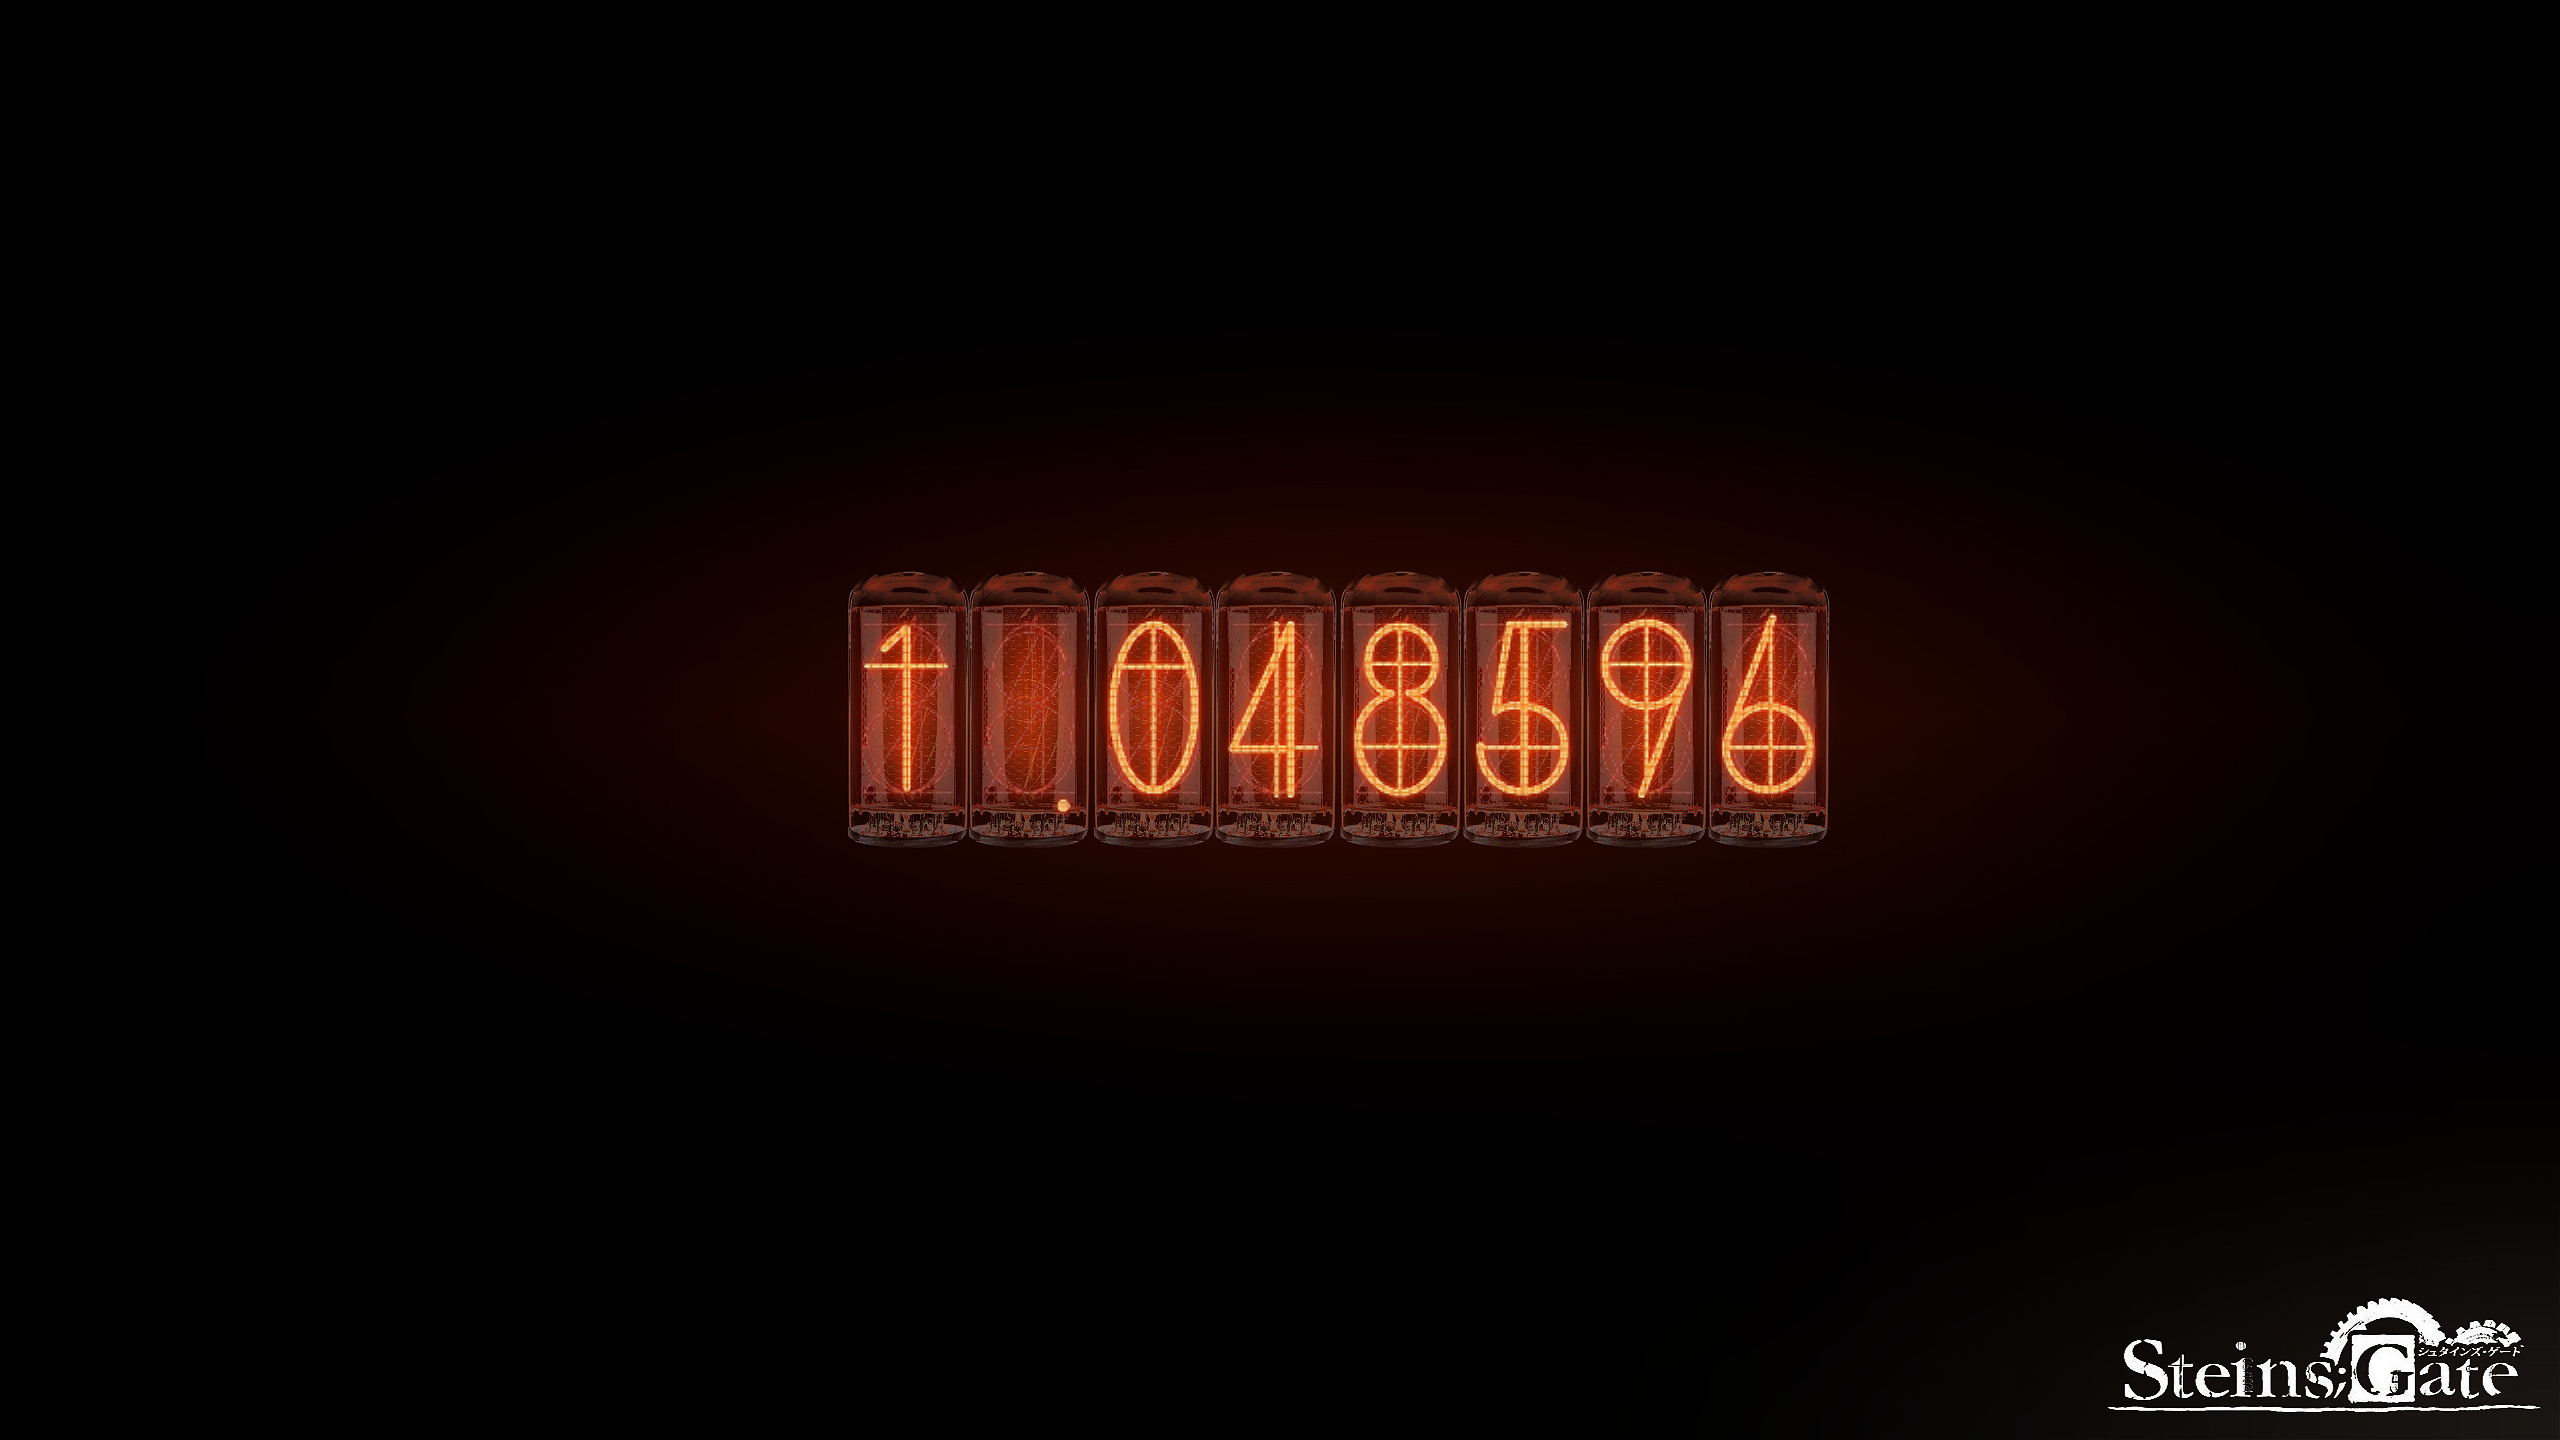 Just Made This Divergence Meter Wallpaper For Myself